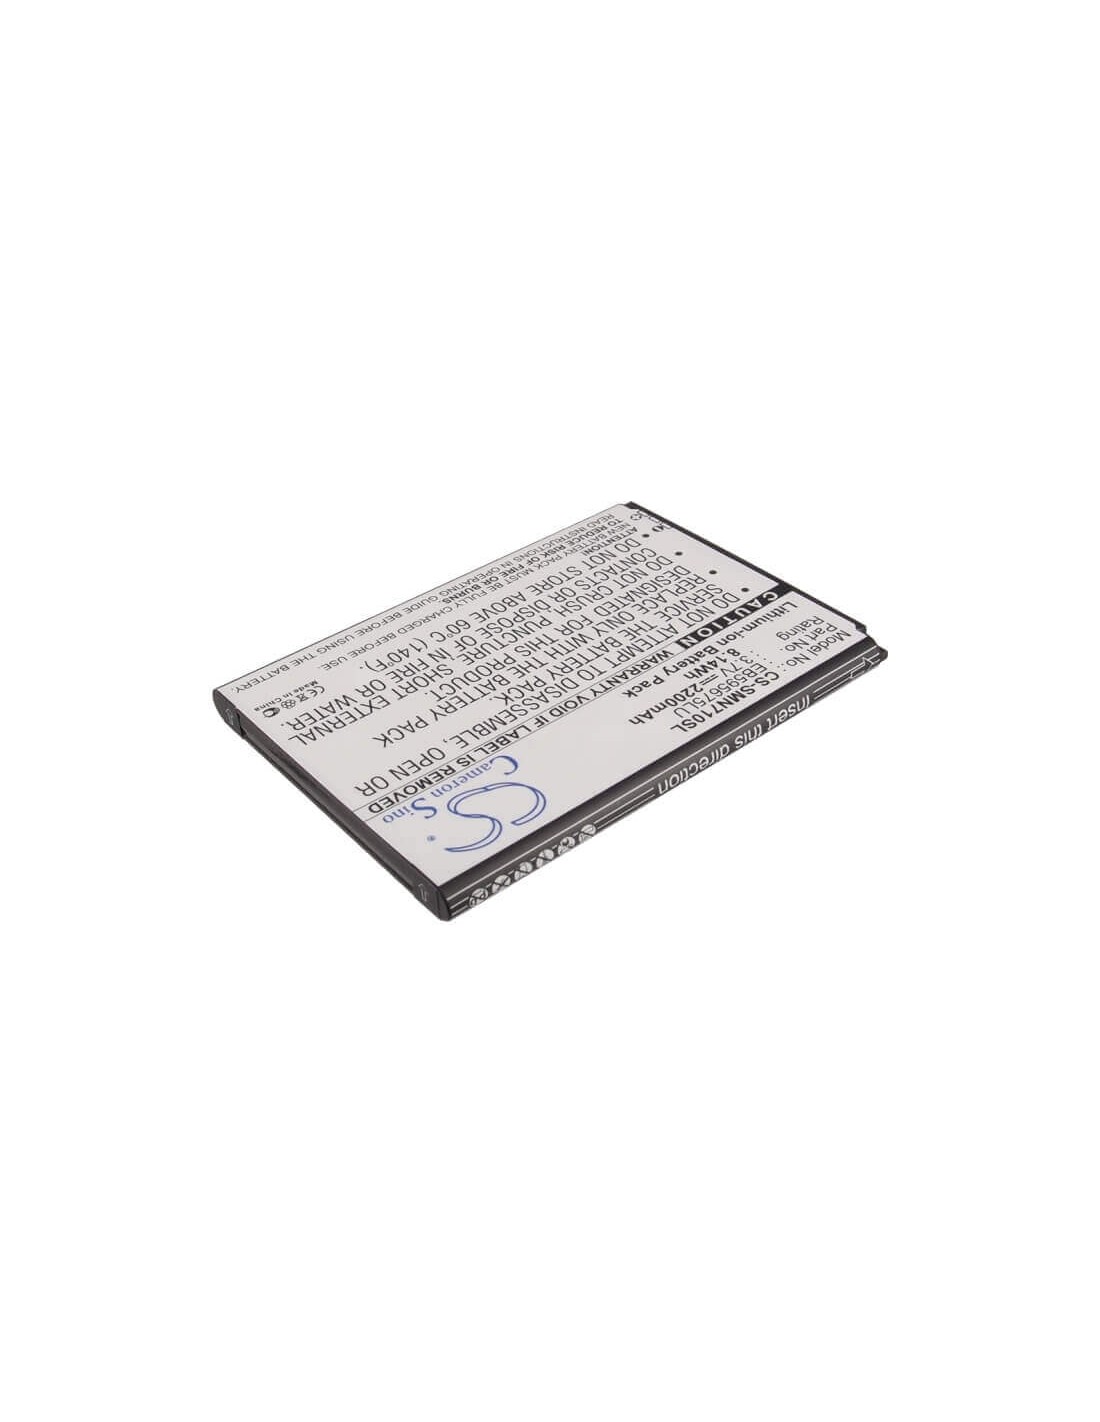 Battery for Samsung GT-N7100, GT-N7105, Galaxy Note II LTE 32GB 3.7V, 2200mAh - 8.14Wh